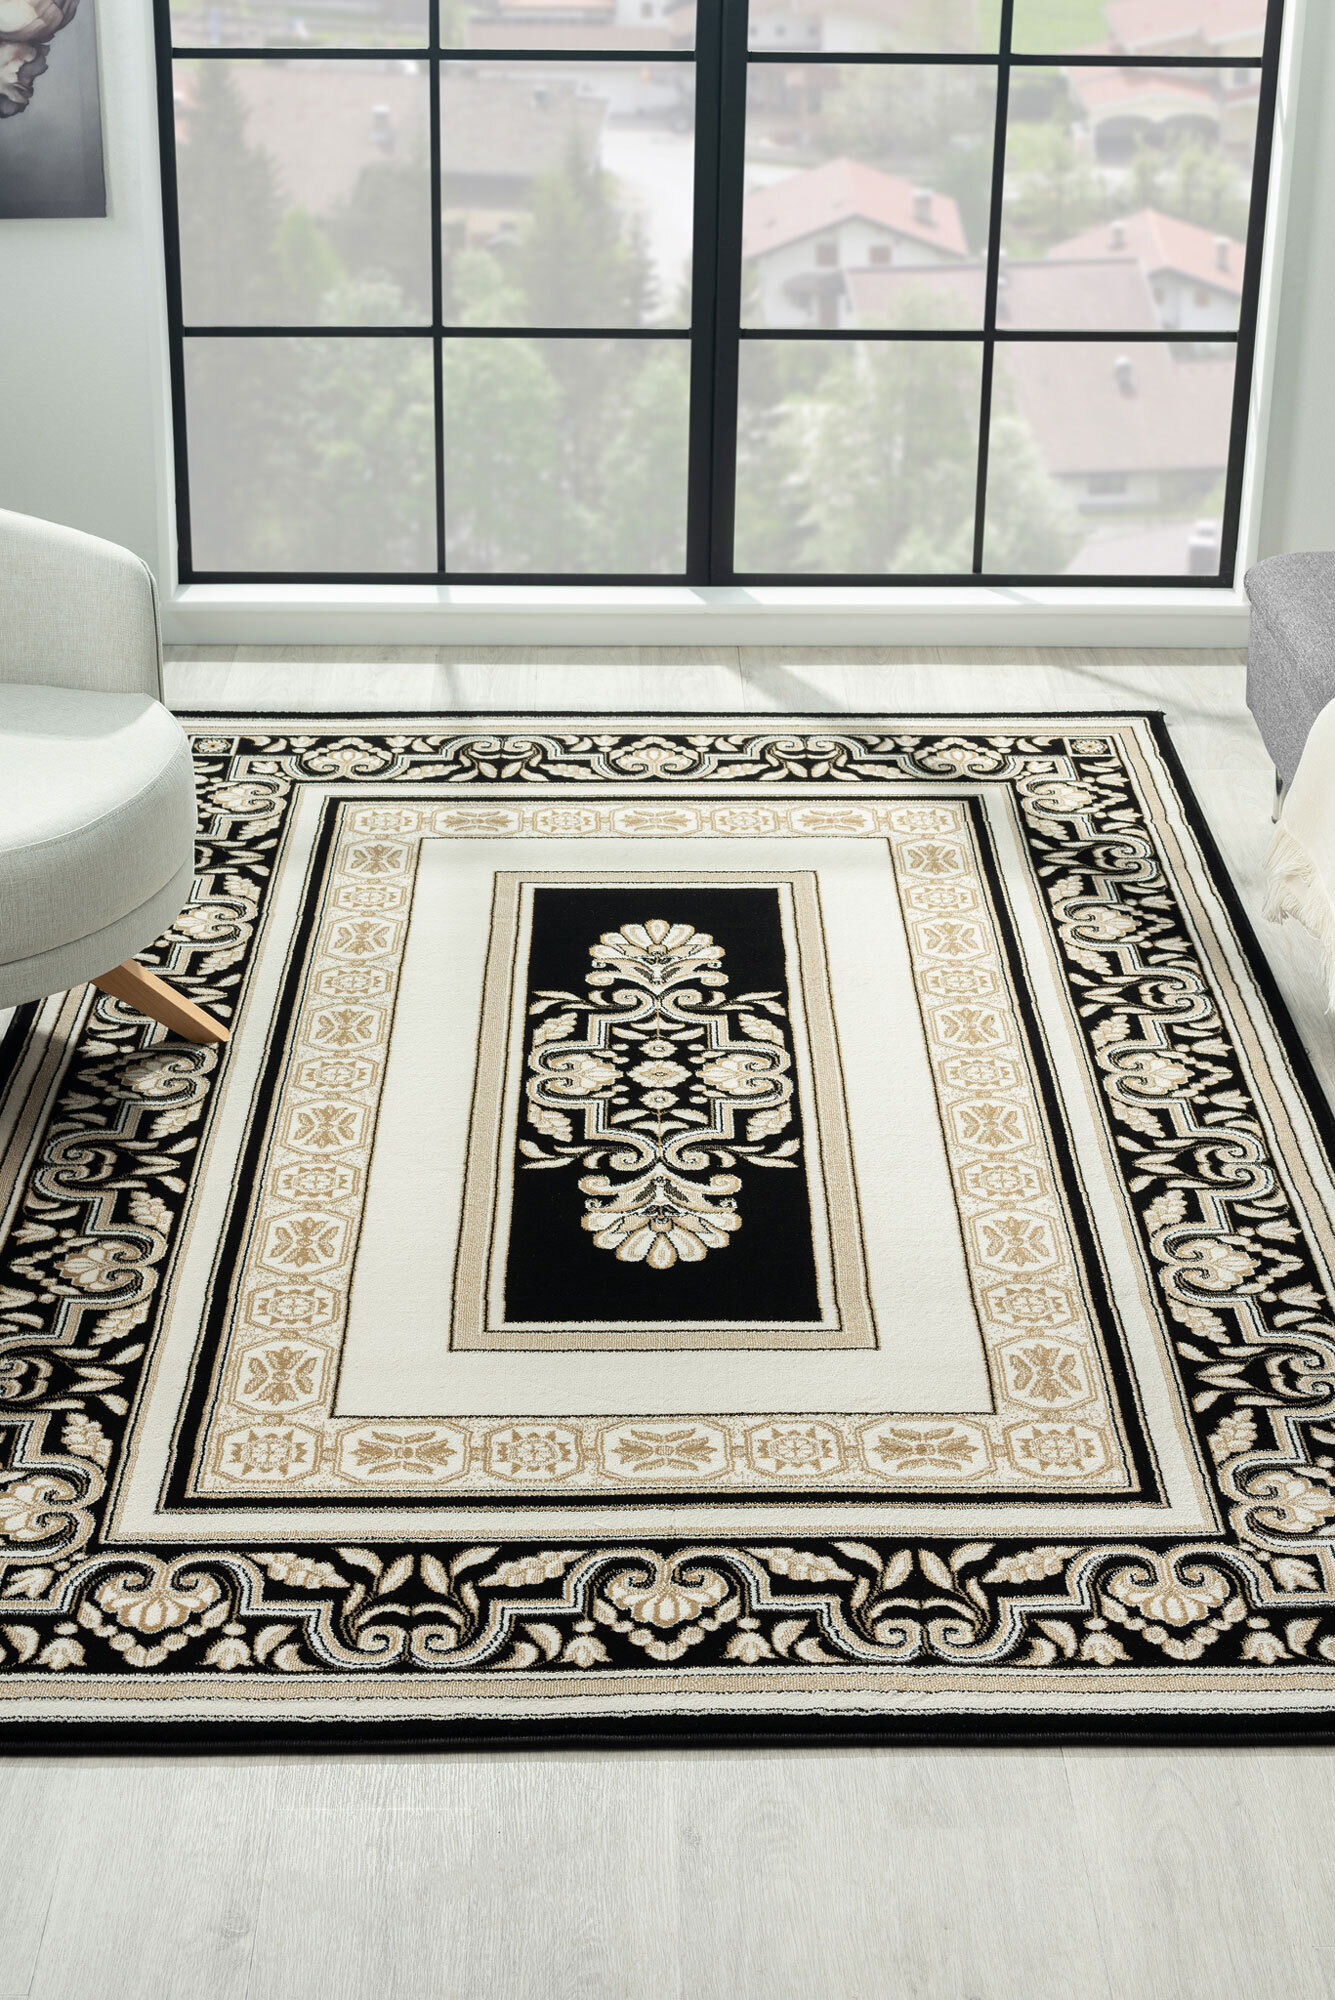 Regent Traditional Rug REG-523BK [Weaves: Power Loomed] [Materials: Synthetics] [Price: $$$] [Style: Traditional] [Size: 290x200 cm] [Colours: Black &